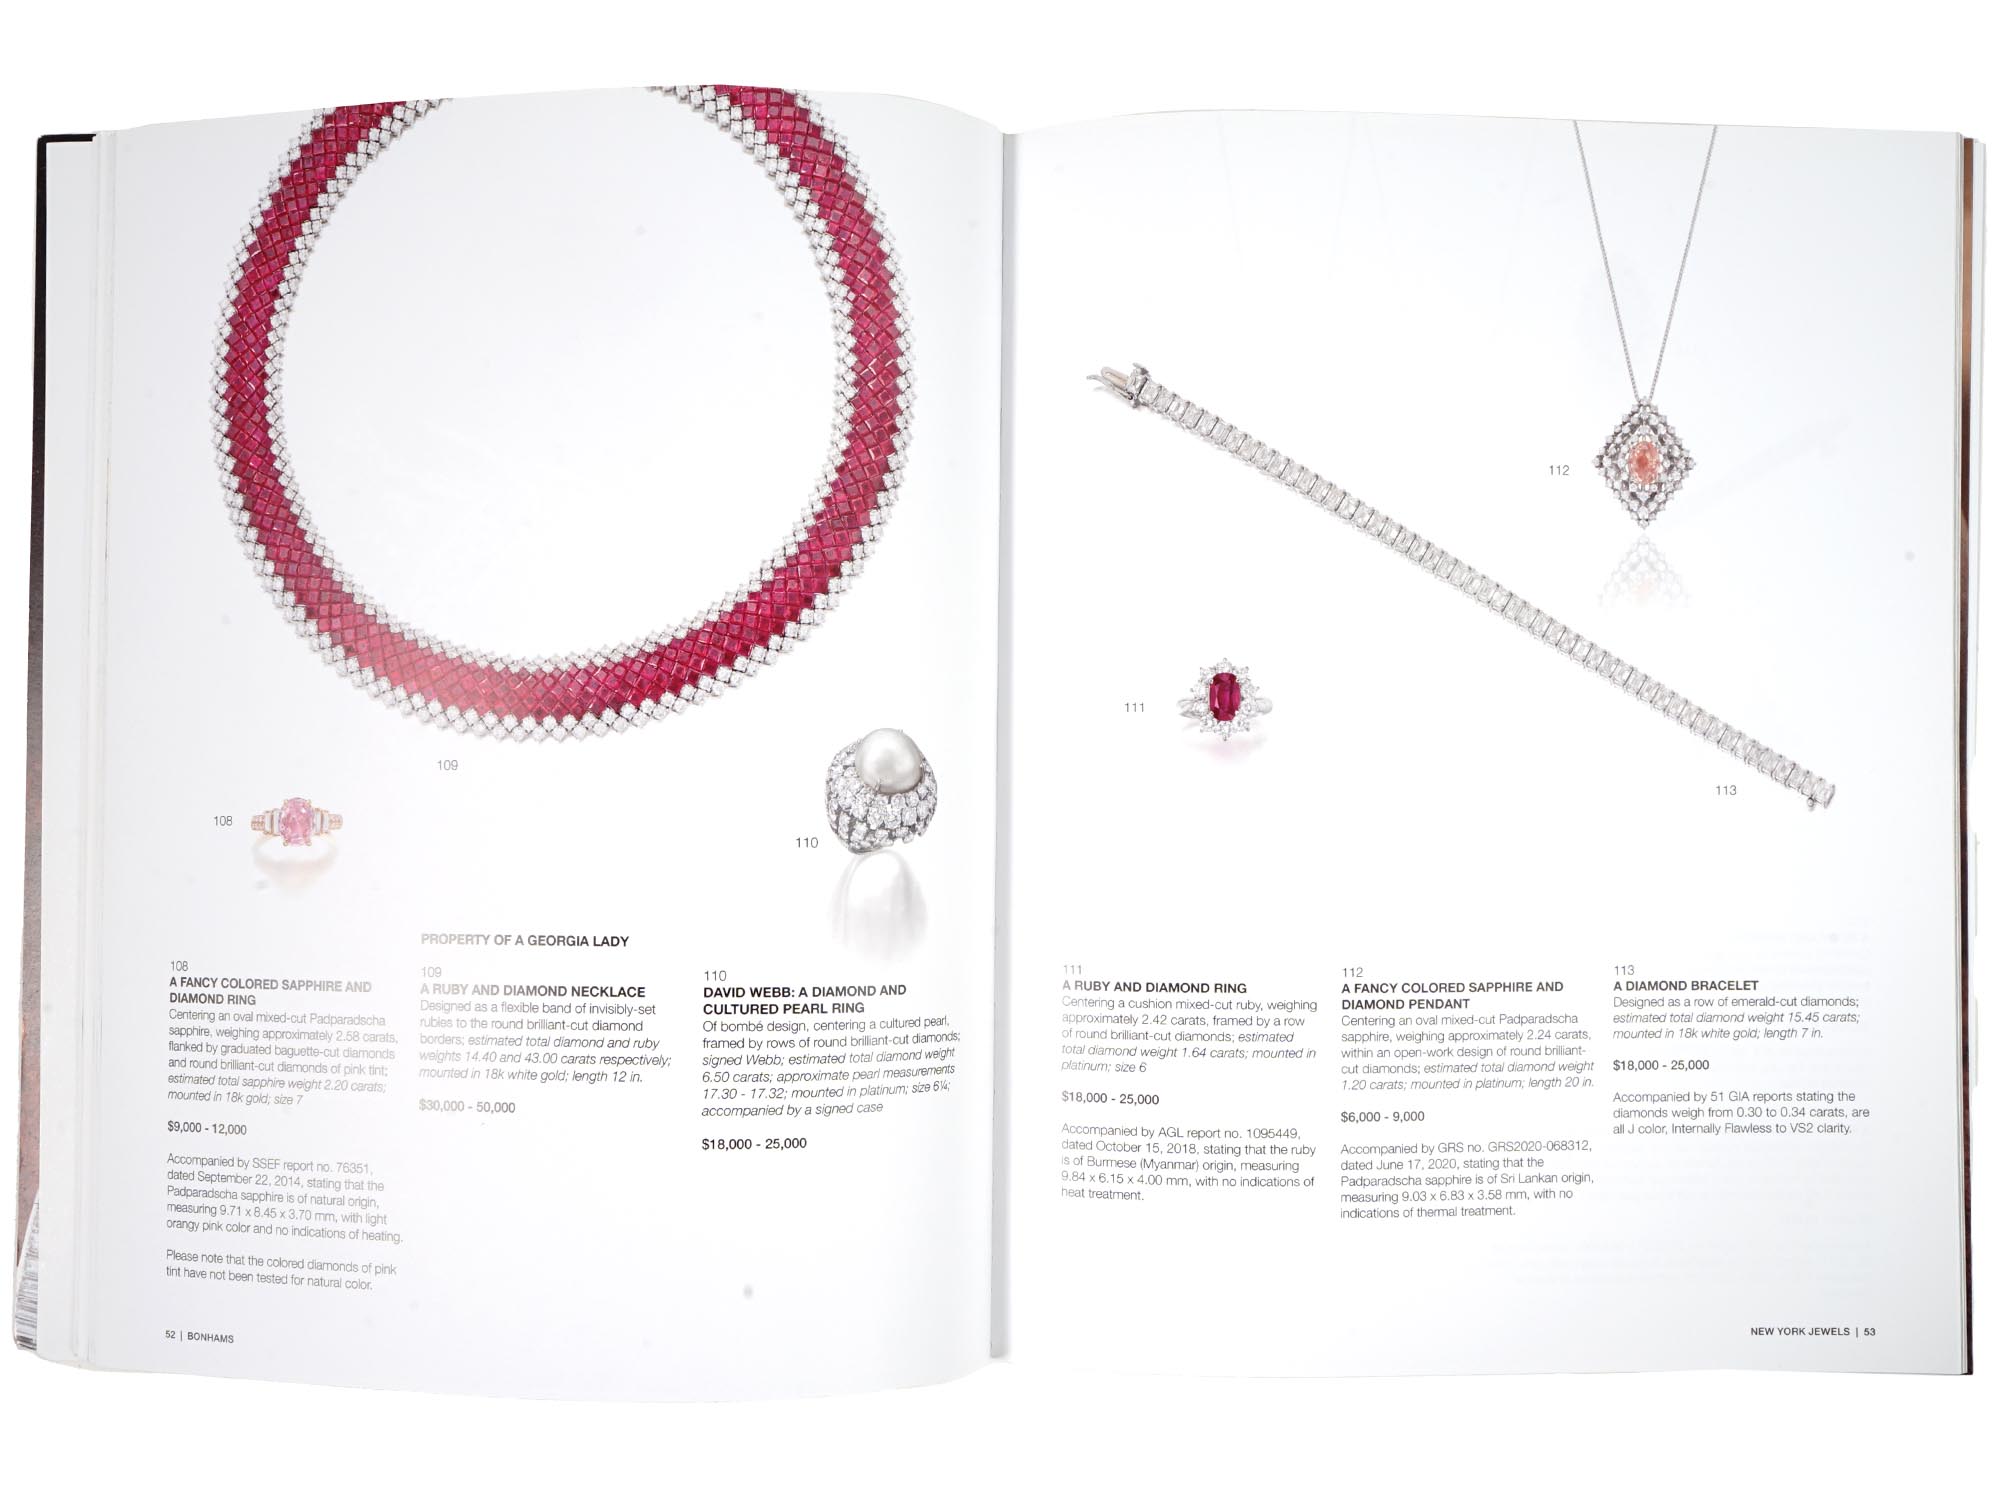 VINTAGE JEWELRY AND TIMEPIECES AUCTION CATALOGUES PIC-14